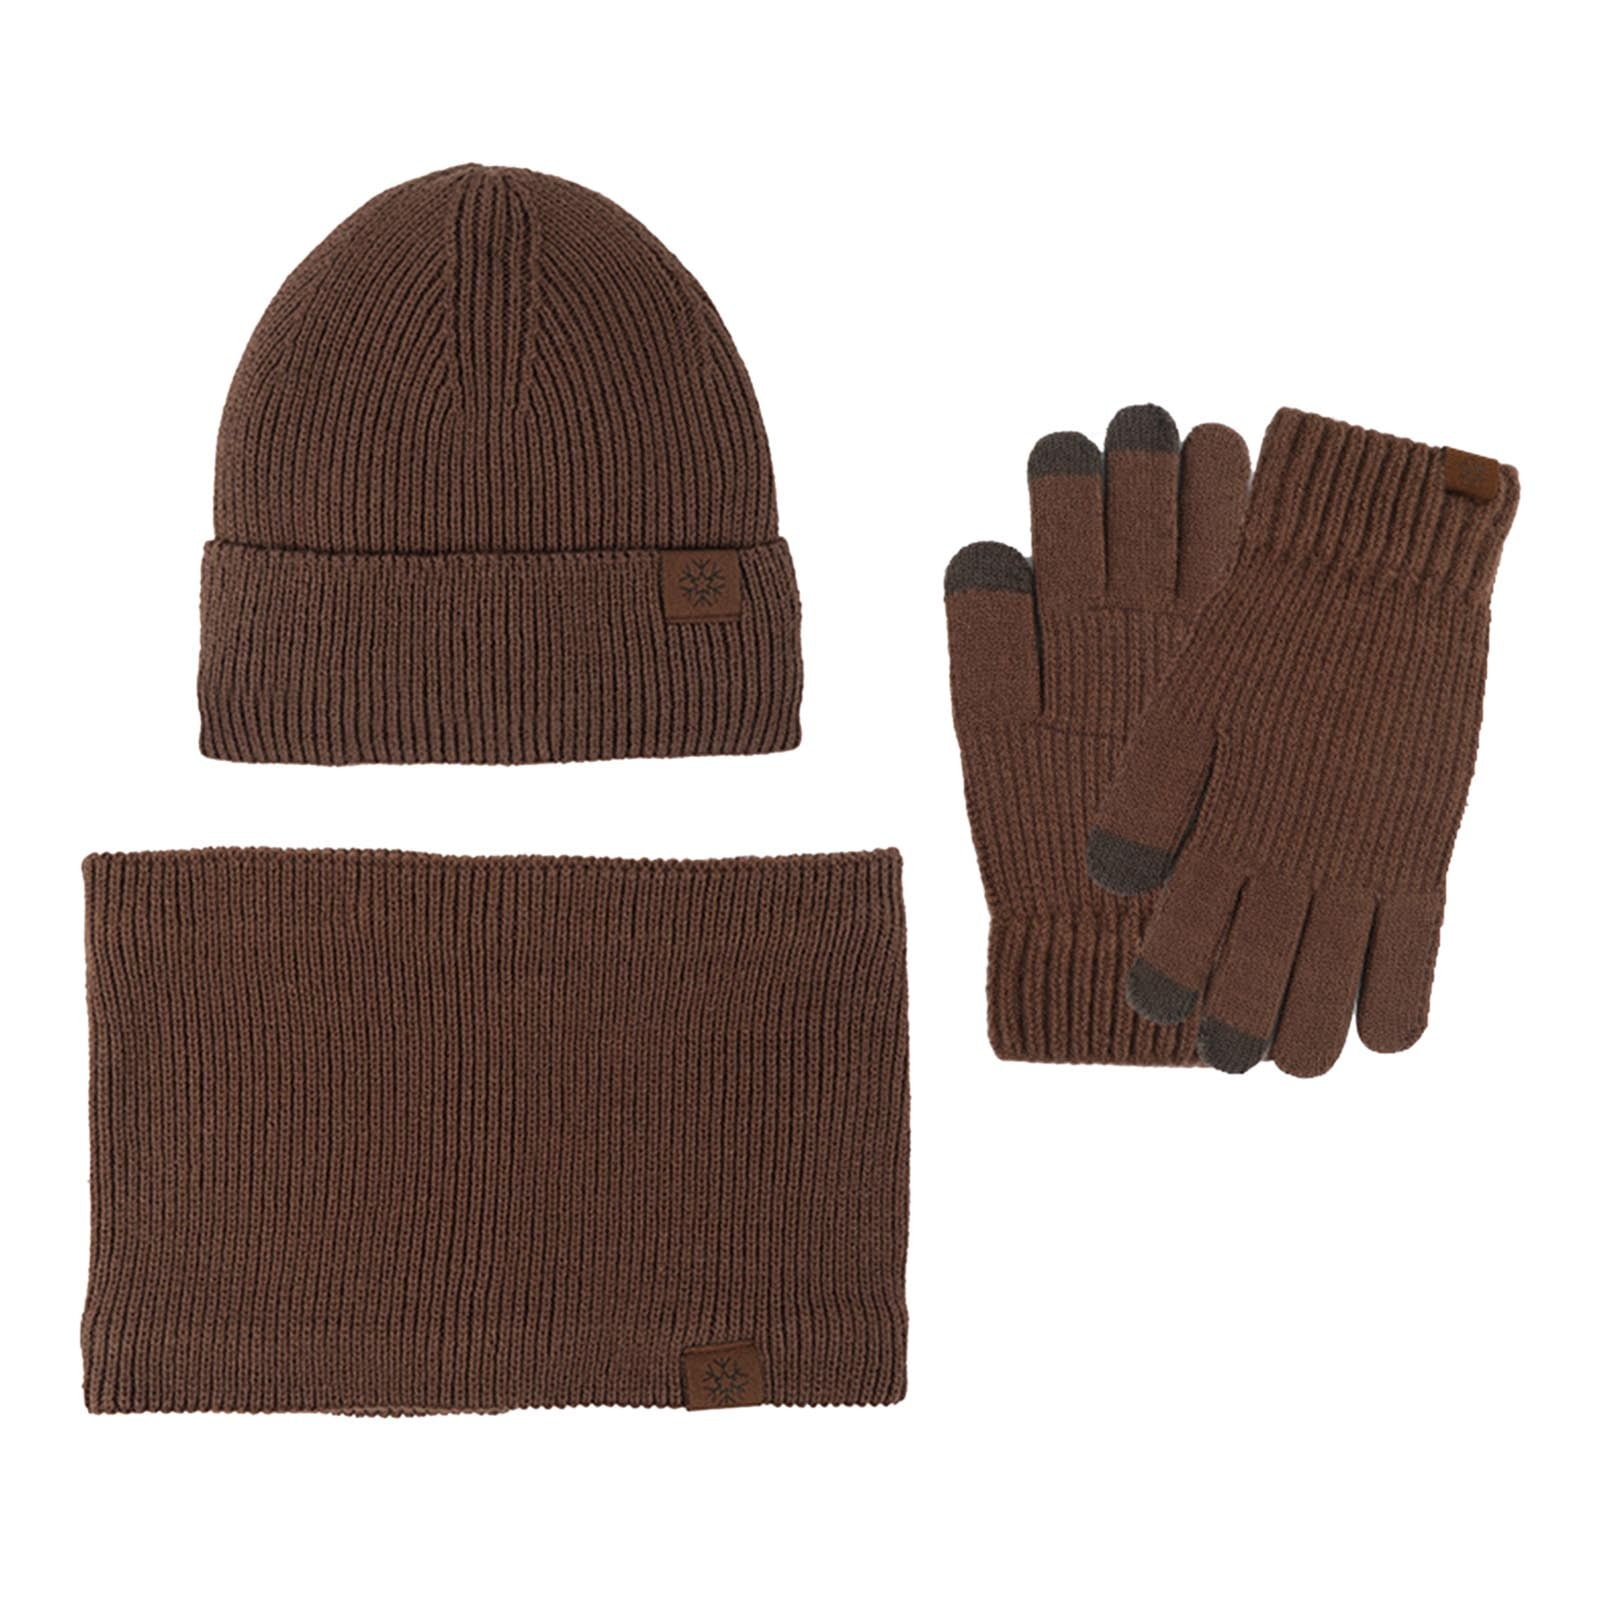 Hat Scarf And Glove Set Women Winter Hats 3 Piece Neck Warmer And ...